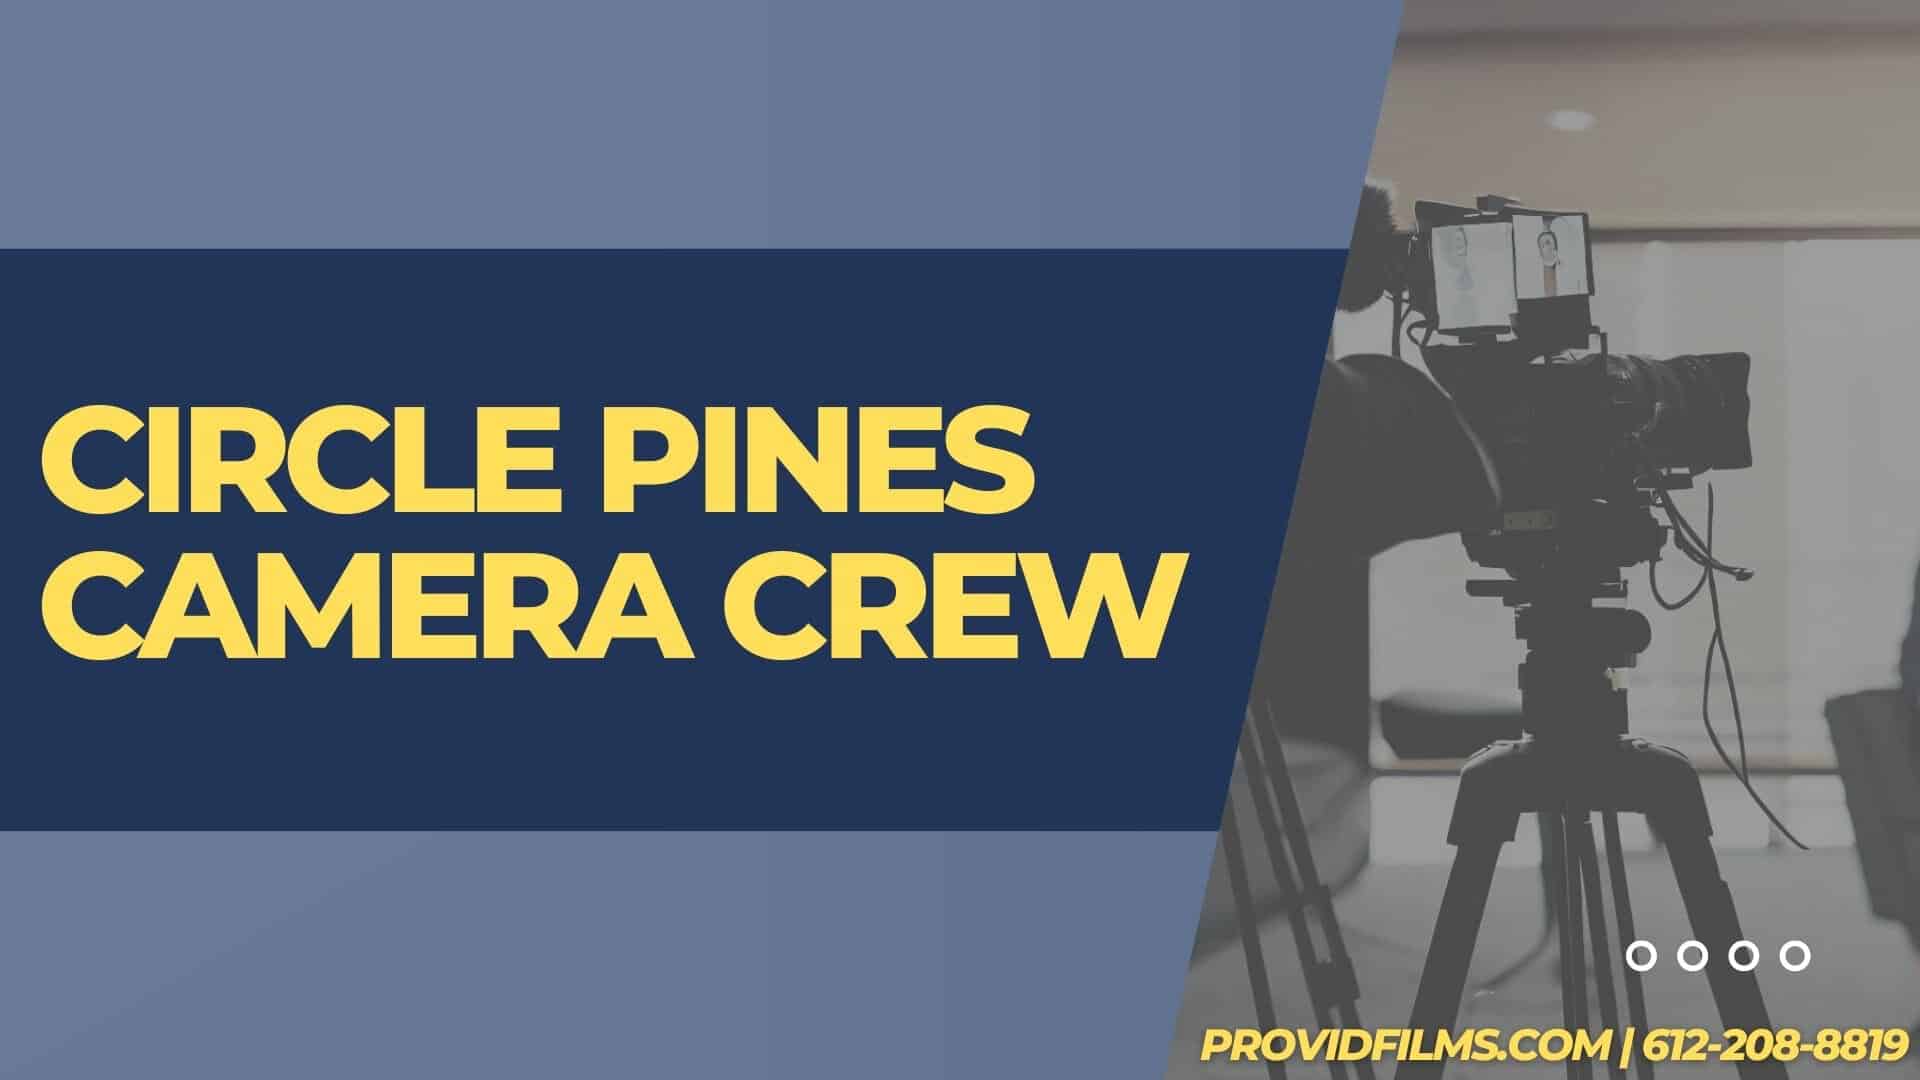 Graphic of a video camera with the text saying "Circle Pines Camera Crew"